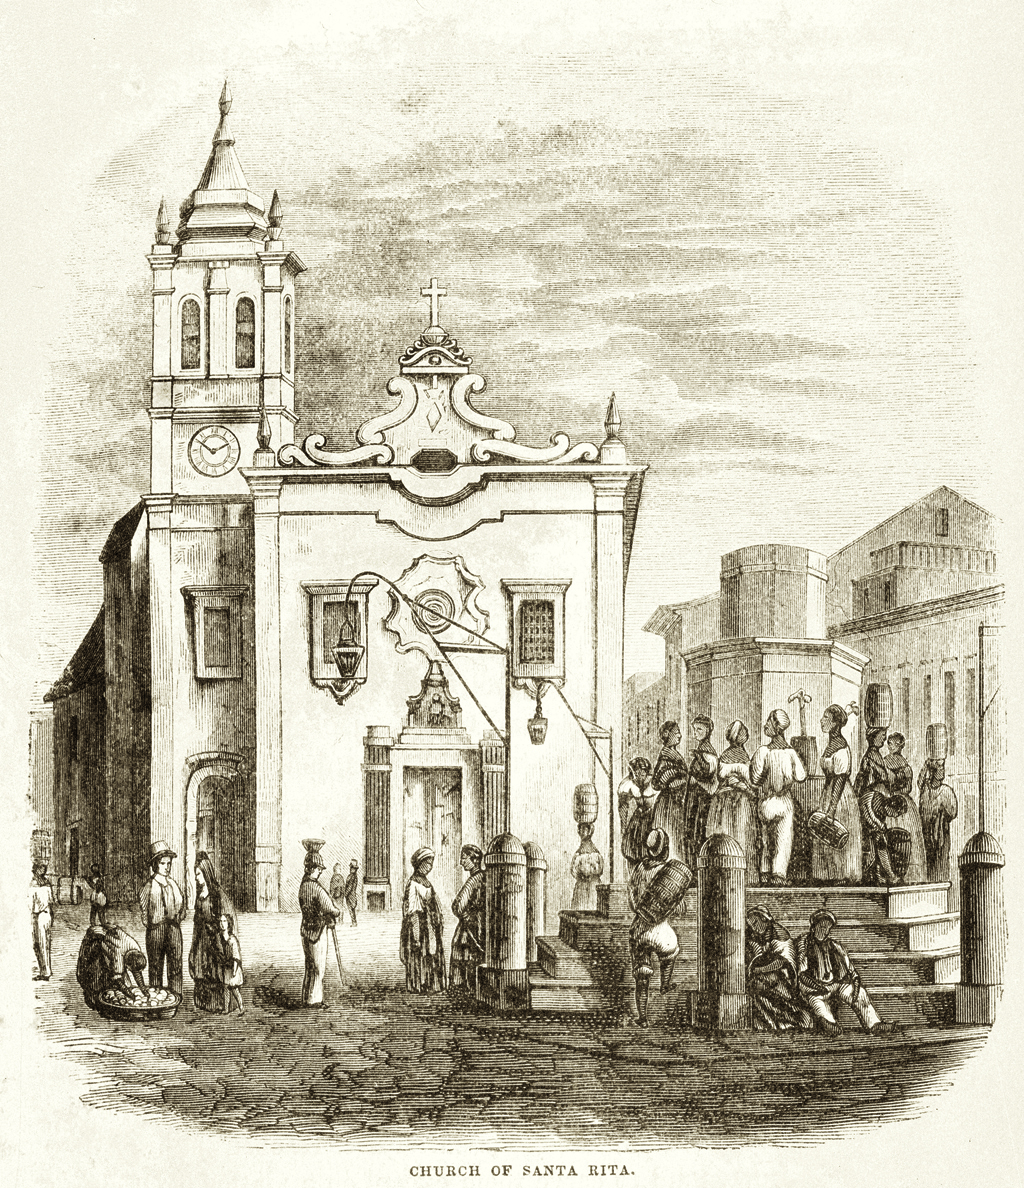 Igreja de Santa Rita. Em: Thomas Ewbank. Life in Brazil, or the land of the cocoa and the palm. London: Sampson Low, Son & Cia. New York: Harper and Brothers, 1856. OR 0357